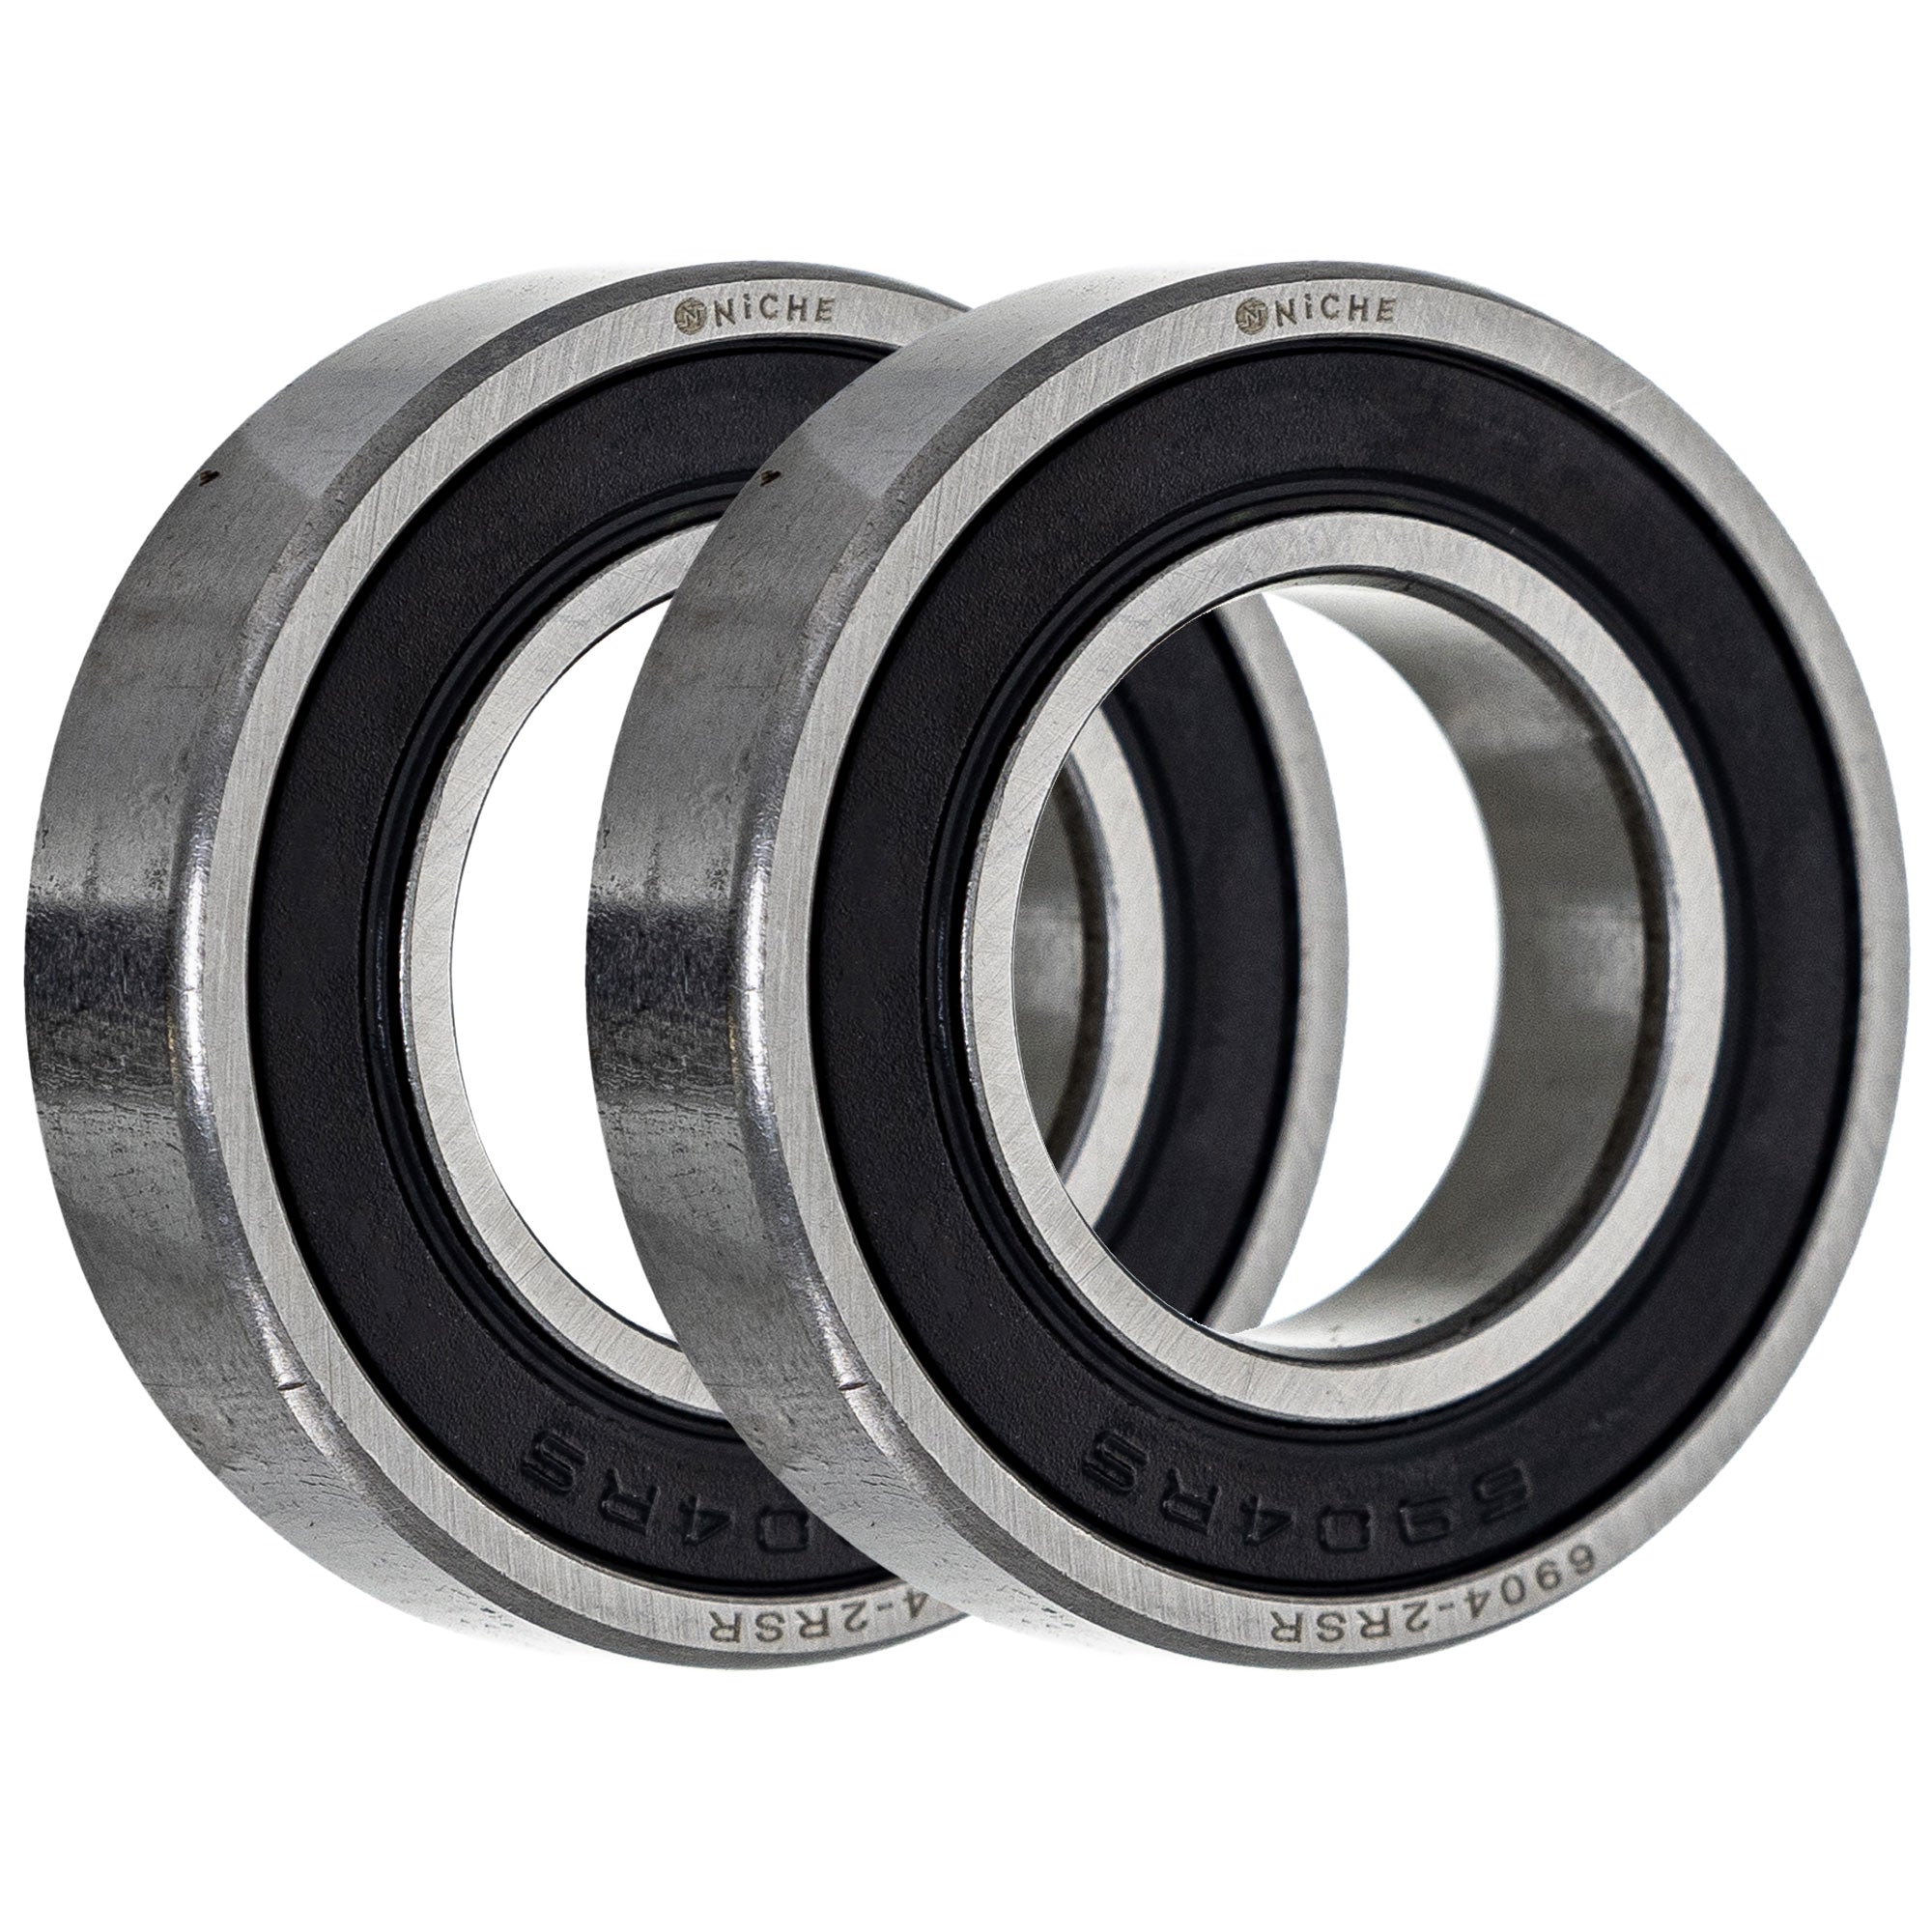 Single Row, Deep Groove, Ball Bearing Pack of 2 2-Pack for zOTHER YZ85 XR80R XR80 XR75 NICHE 519-CBB2287R